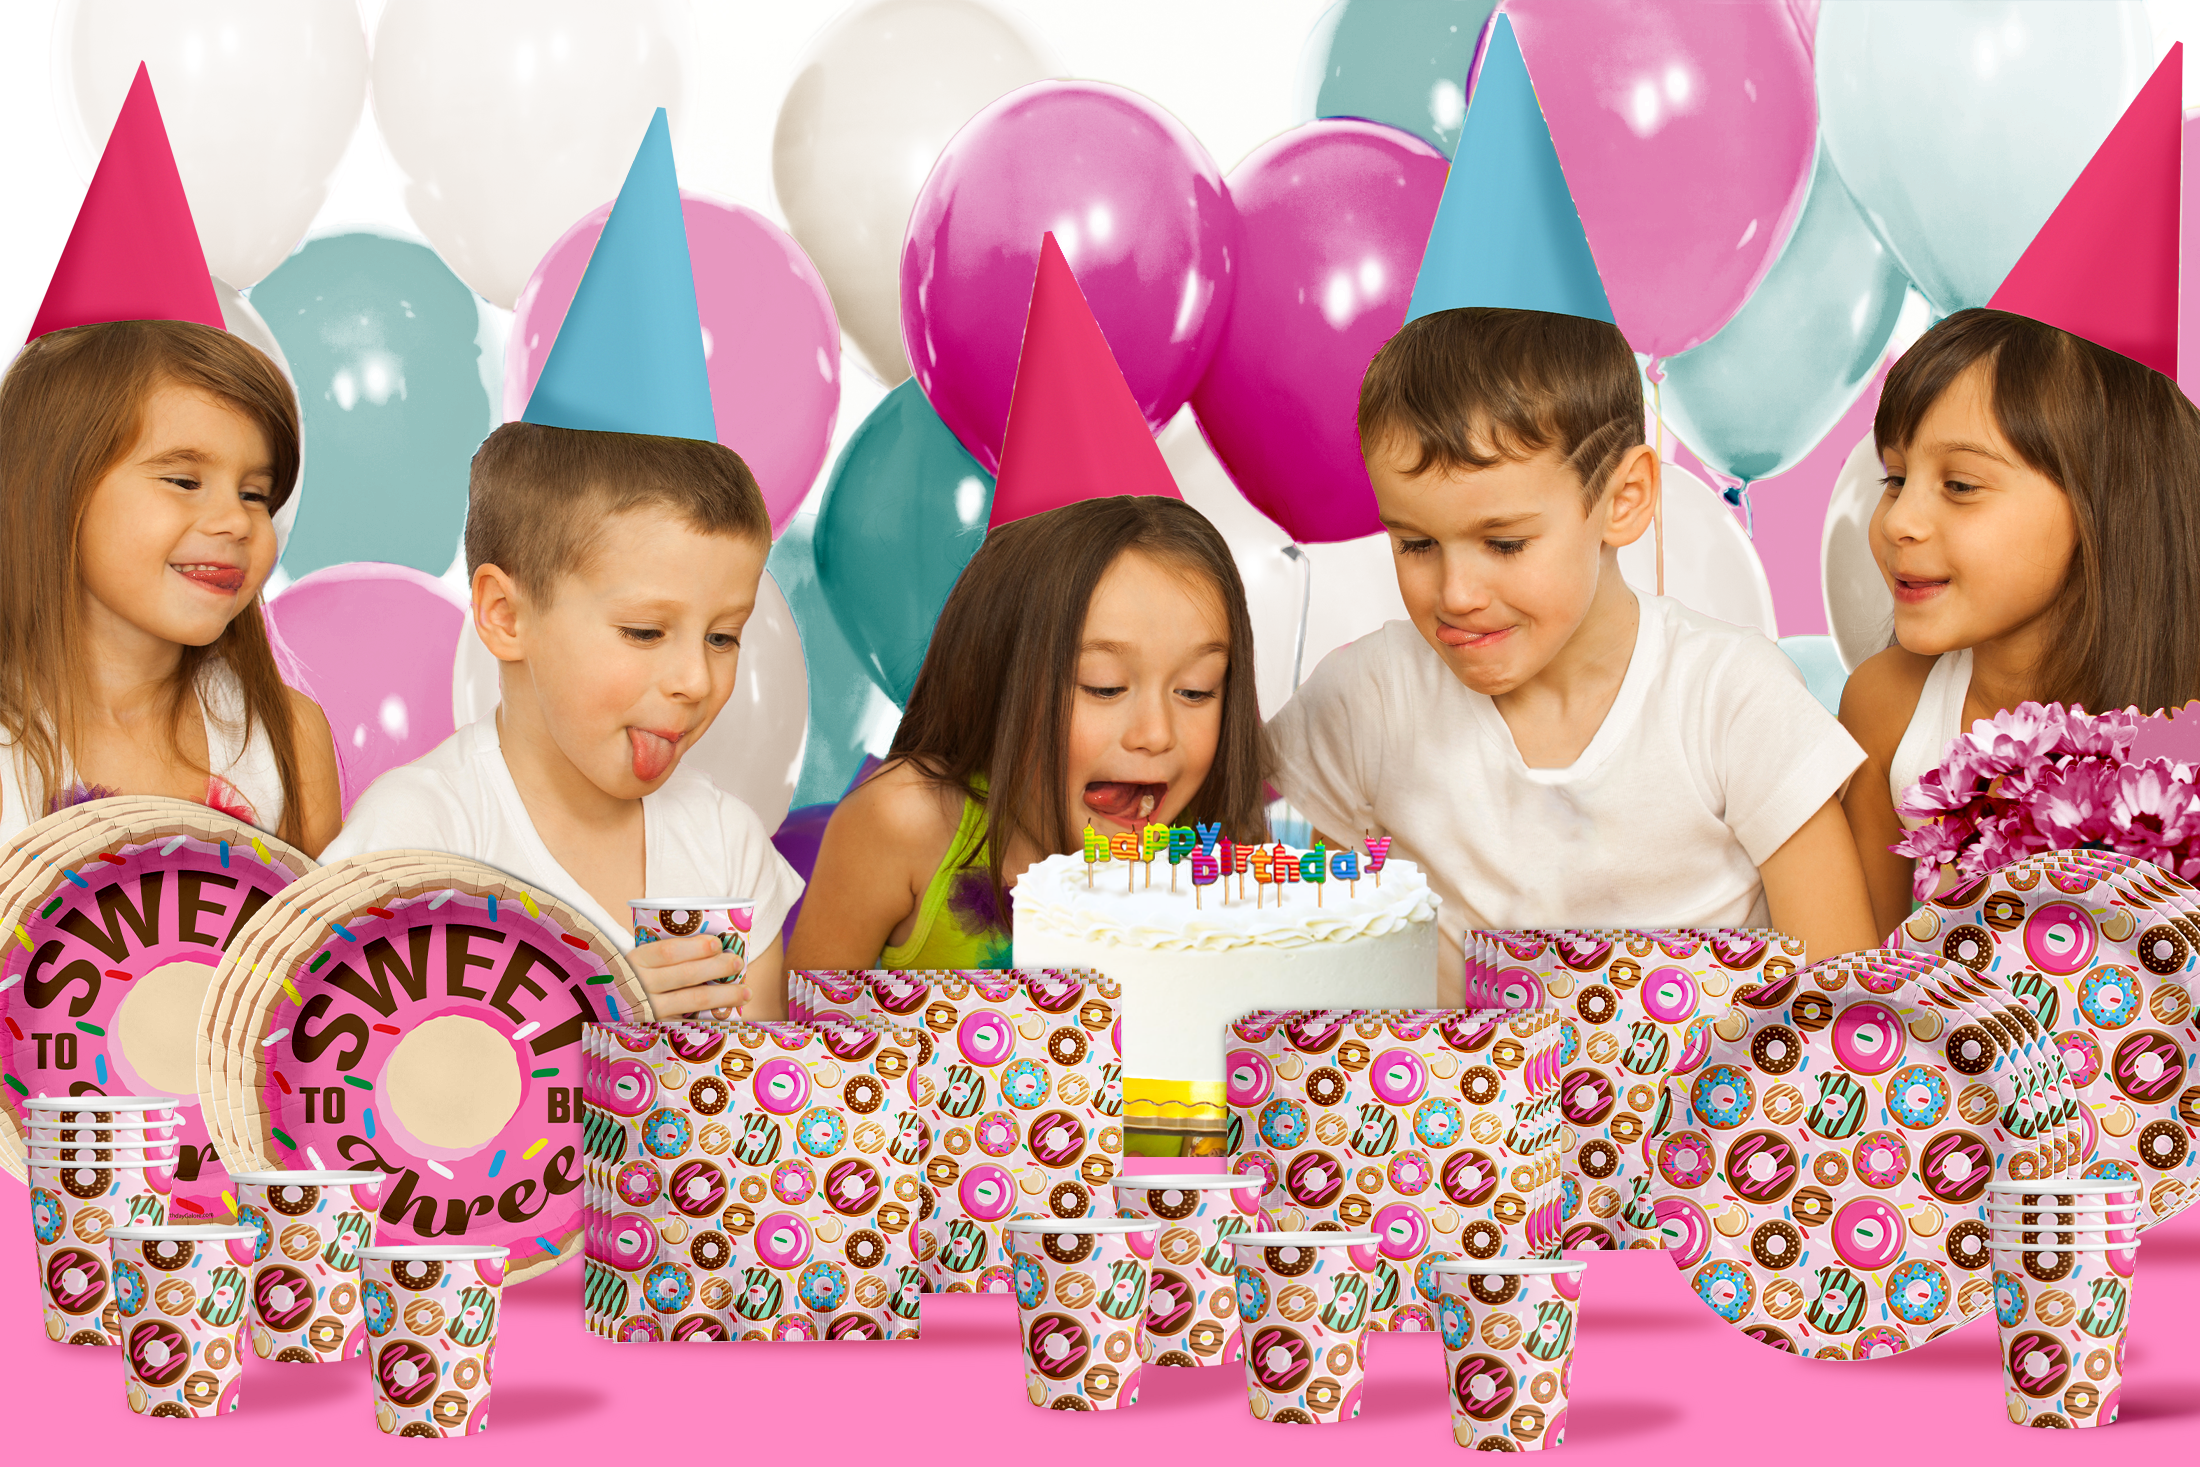 Girls 3rd Birthday Party Supplies - Sweet to Be Three Donut Birthday Paper Plates - 64 Piece Tableware Set Includes Large 9" Paper Plates Dessert Plates, Cups and Napkins Kit for 16